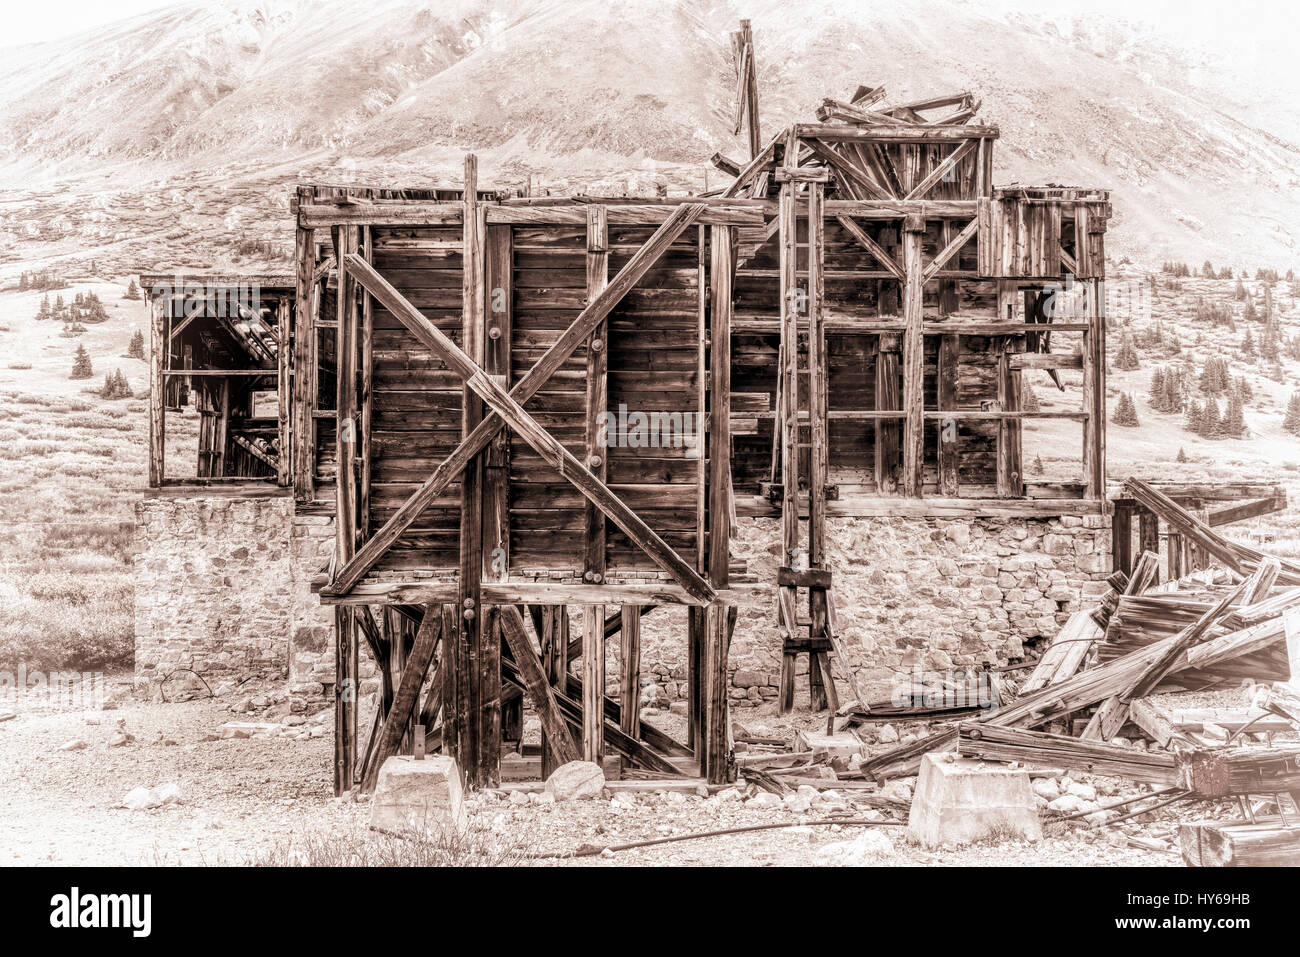 ruins of gold mine  (processing mill) near Mosquito Pass in Rocky Mountains, Colorado, retro opalotype processing Stock Photo